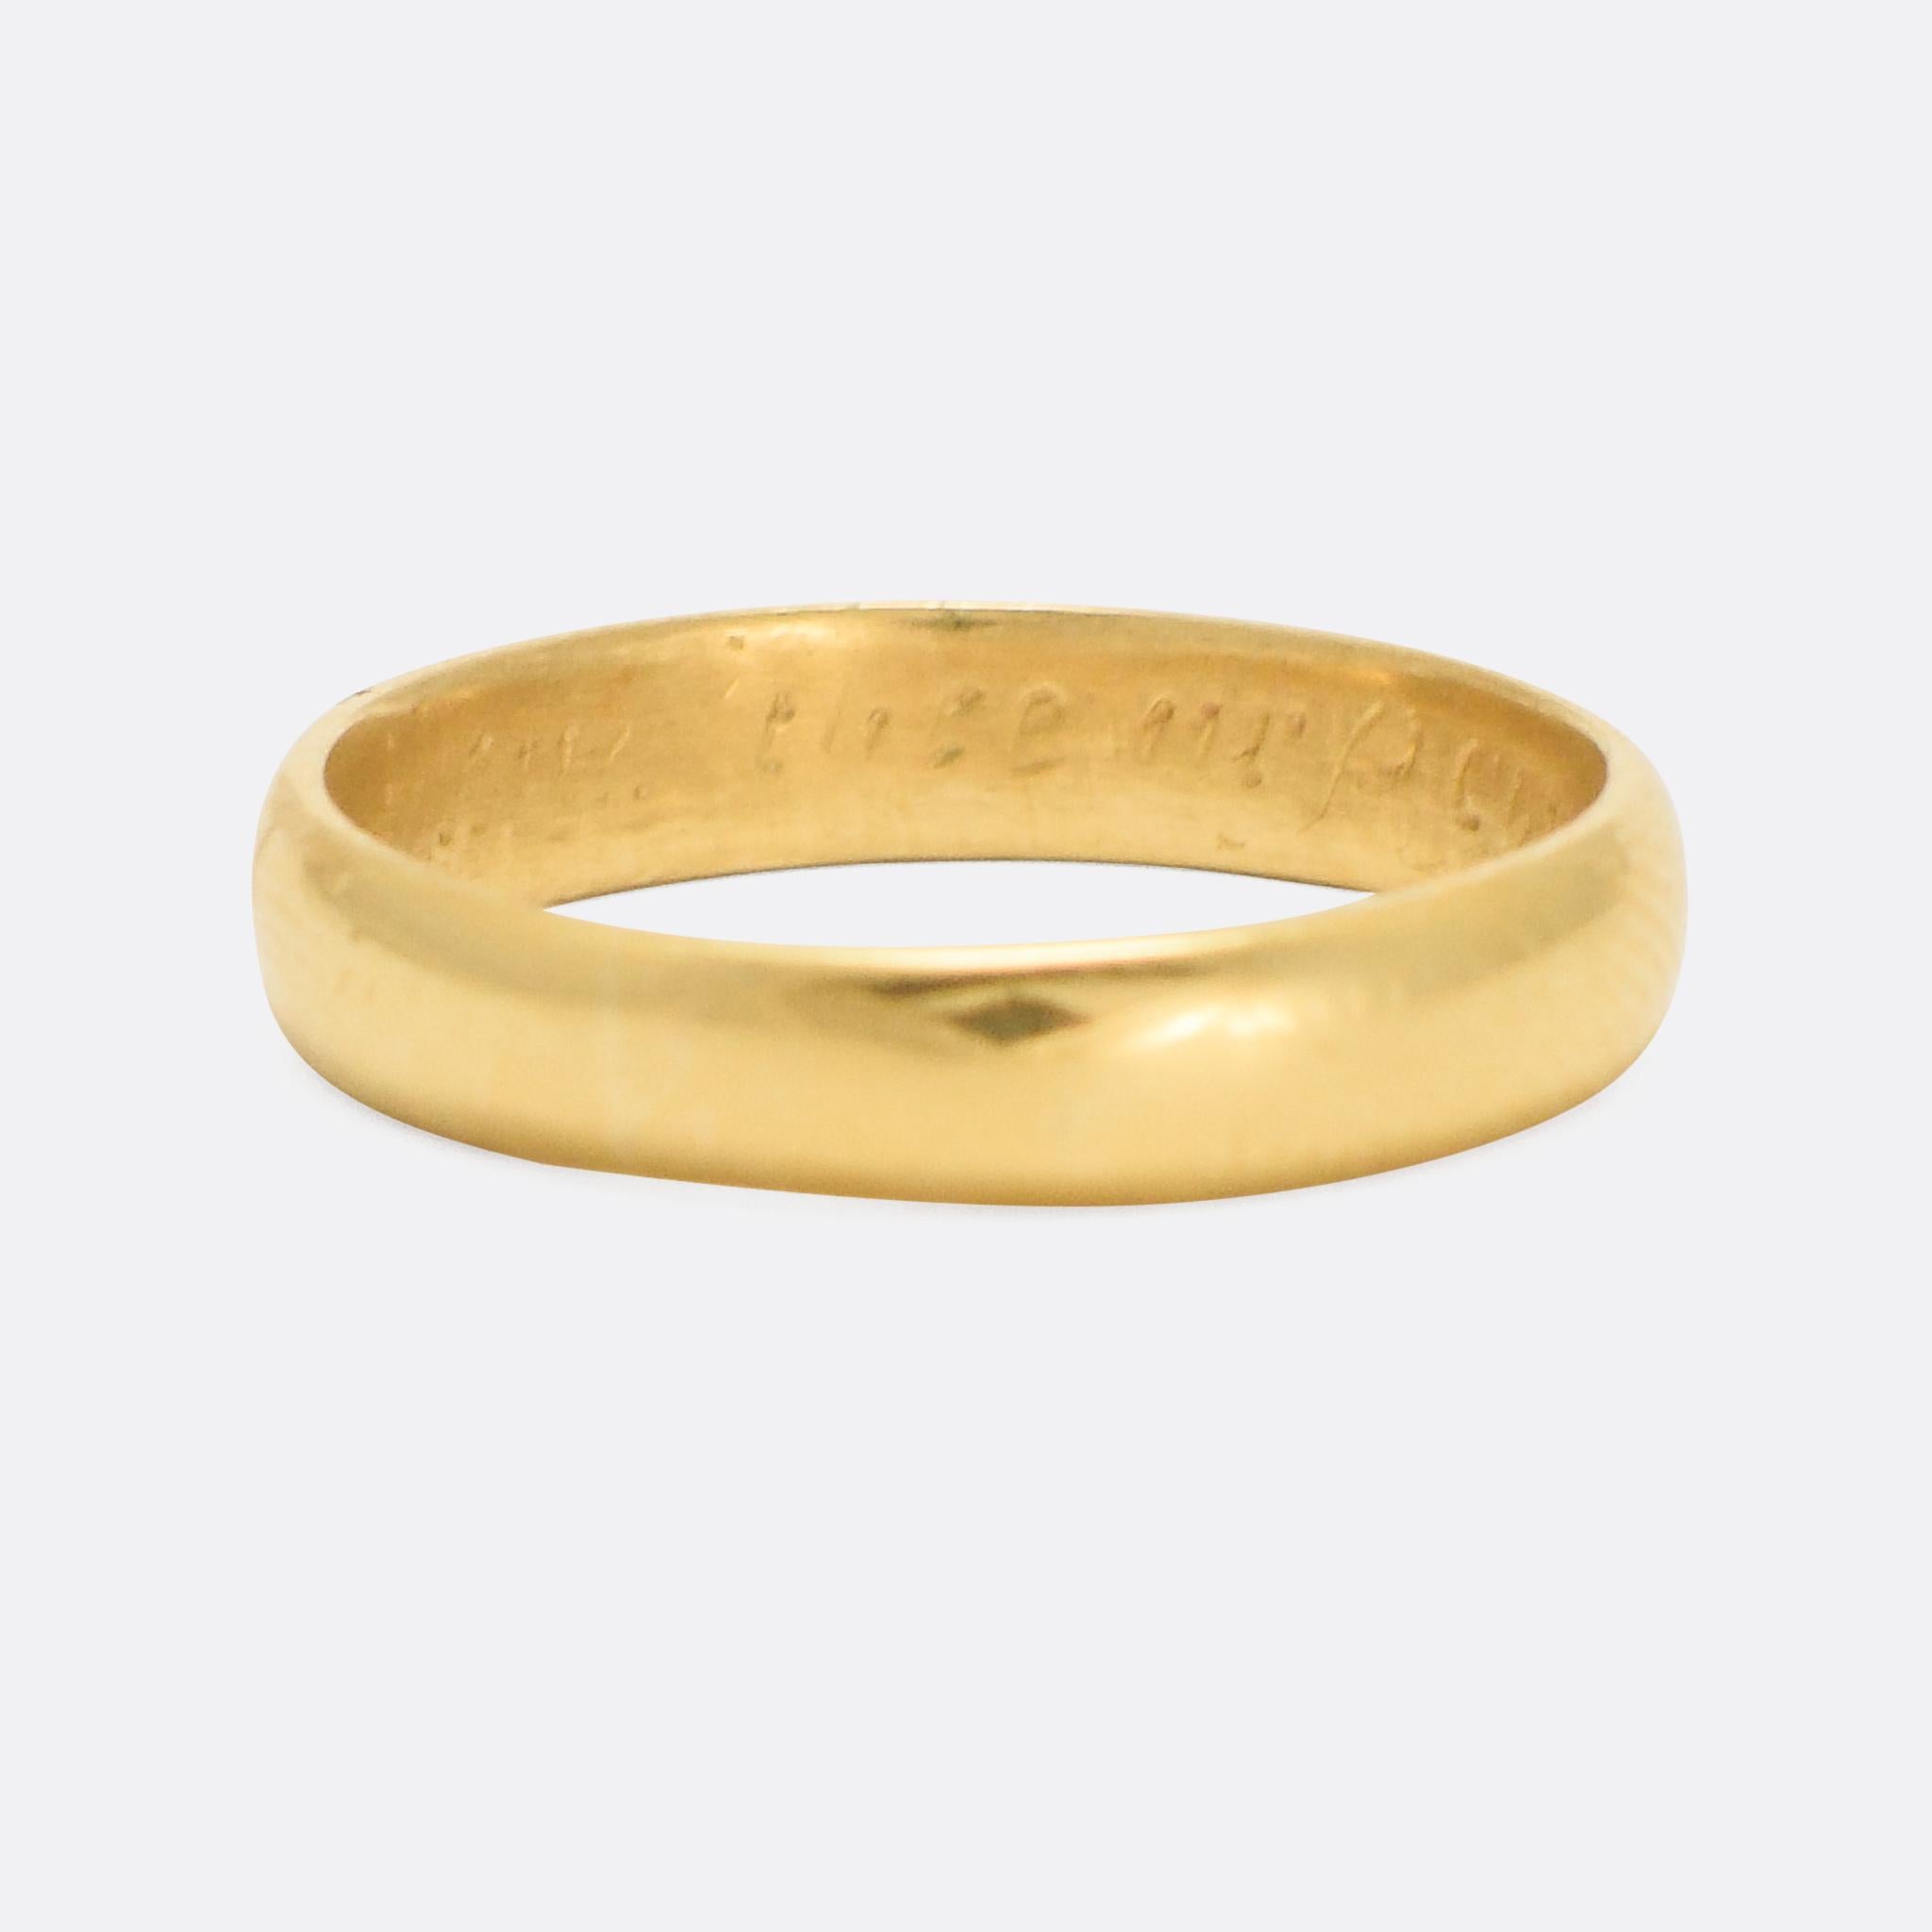 A sweet 18th Century Posy ring engraved with the words 